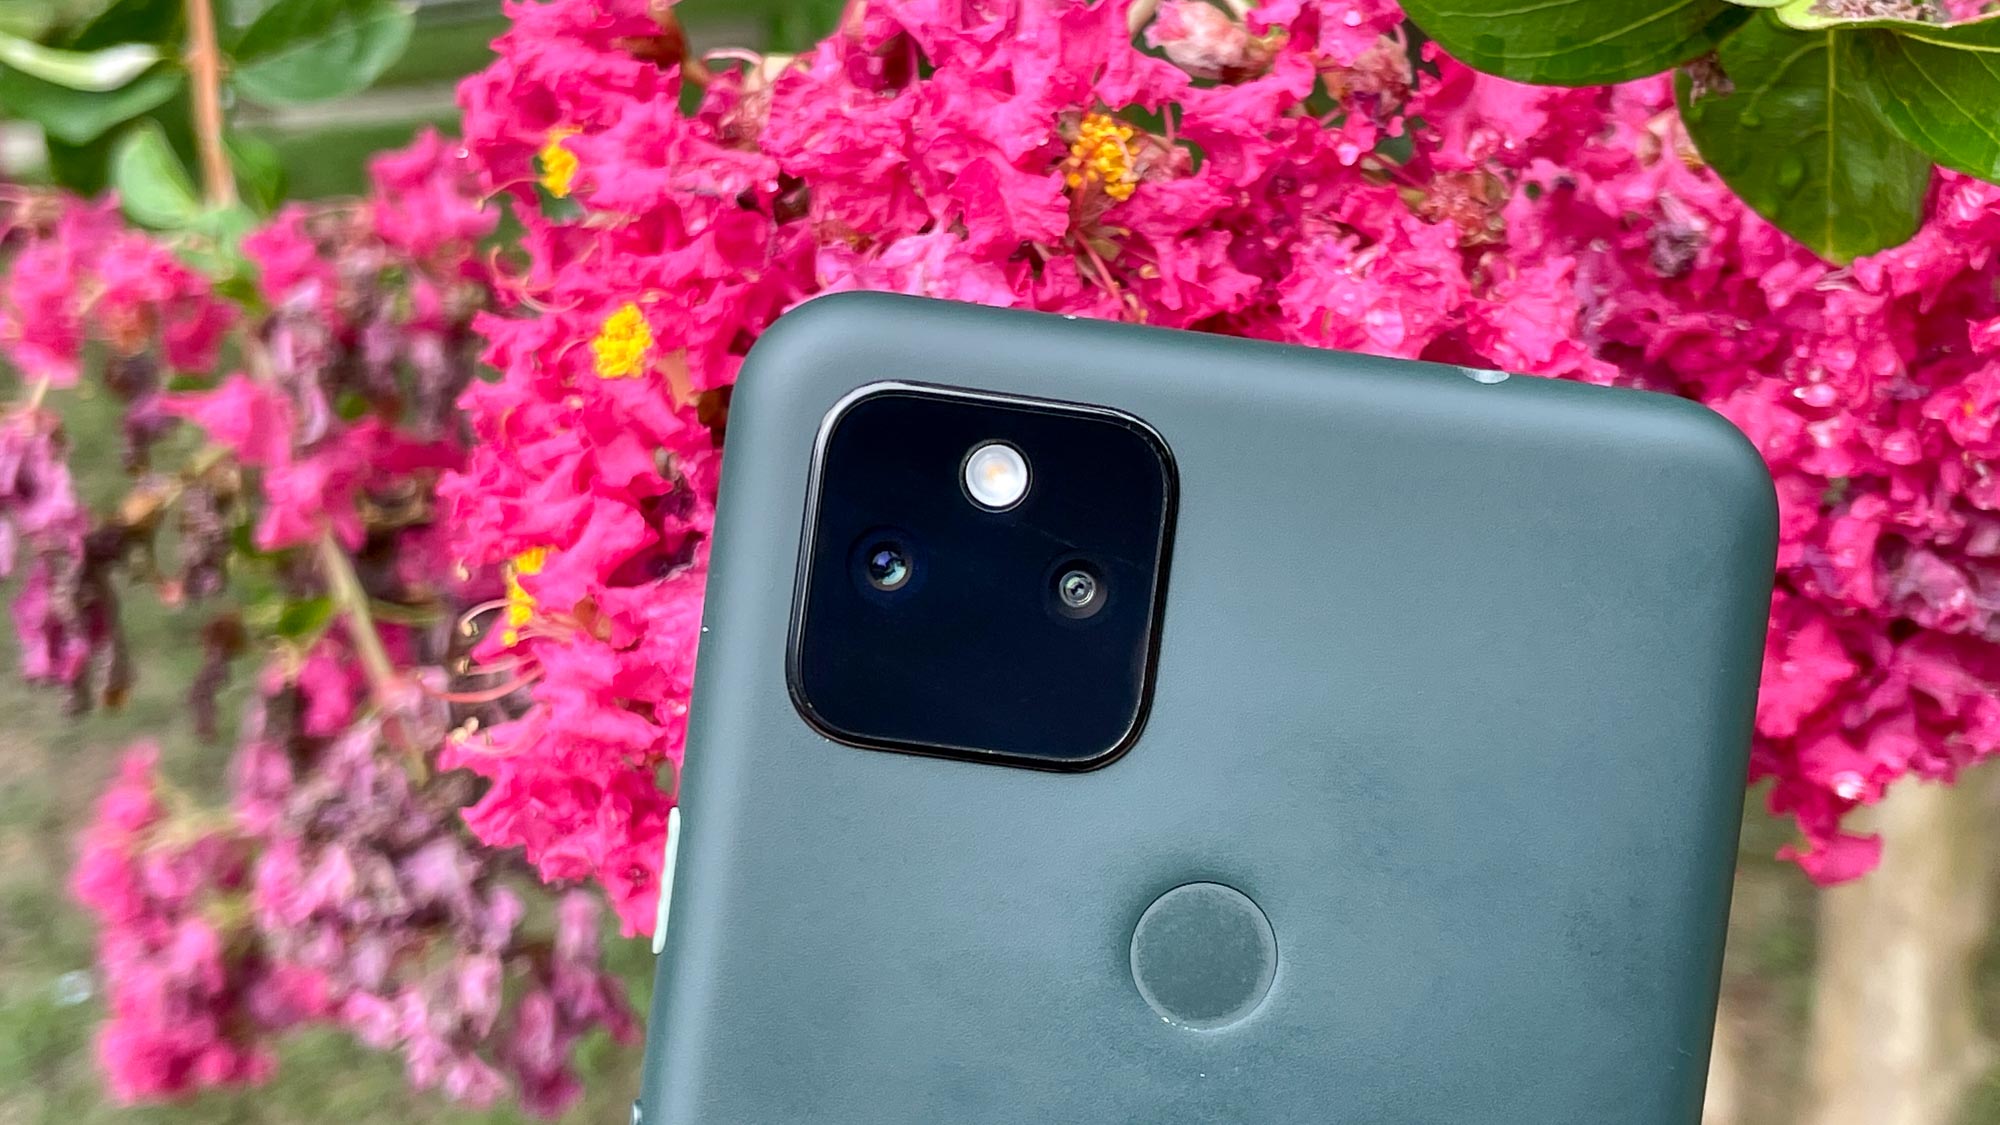 The back of the Google Pixel 5a with the camera module and pink flowers in the background